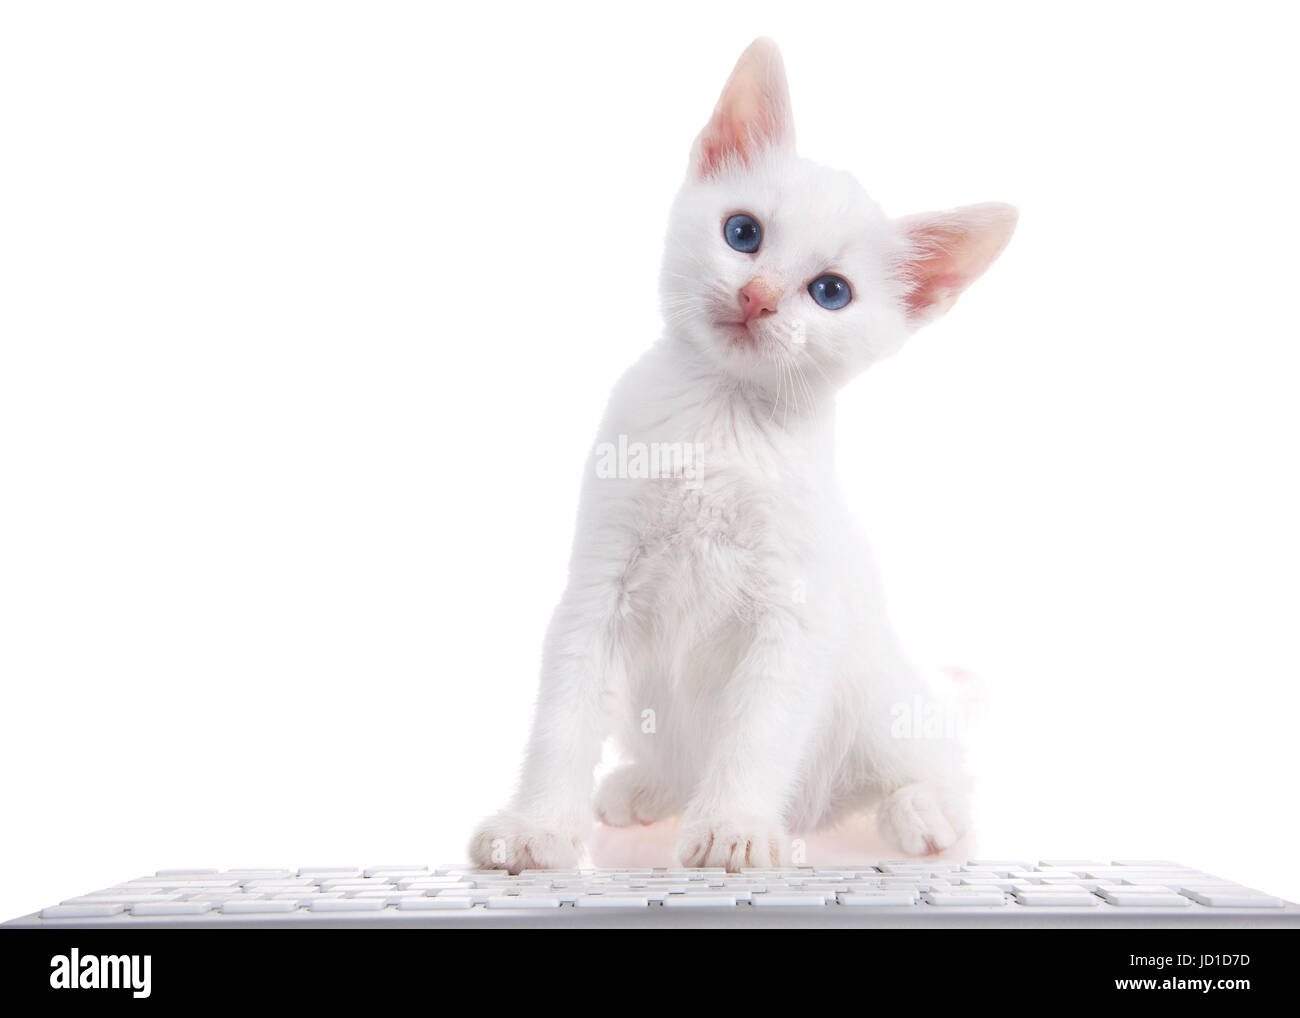 One fluffy white kitten with pretty blue eyes sitting on a white surface with computer keyboard in front of him isolated on white background. Stock Photo